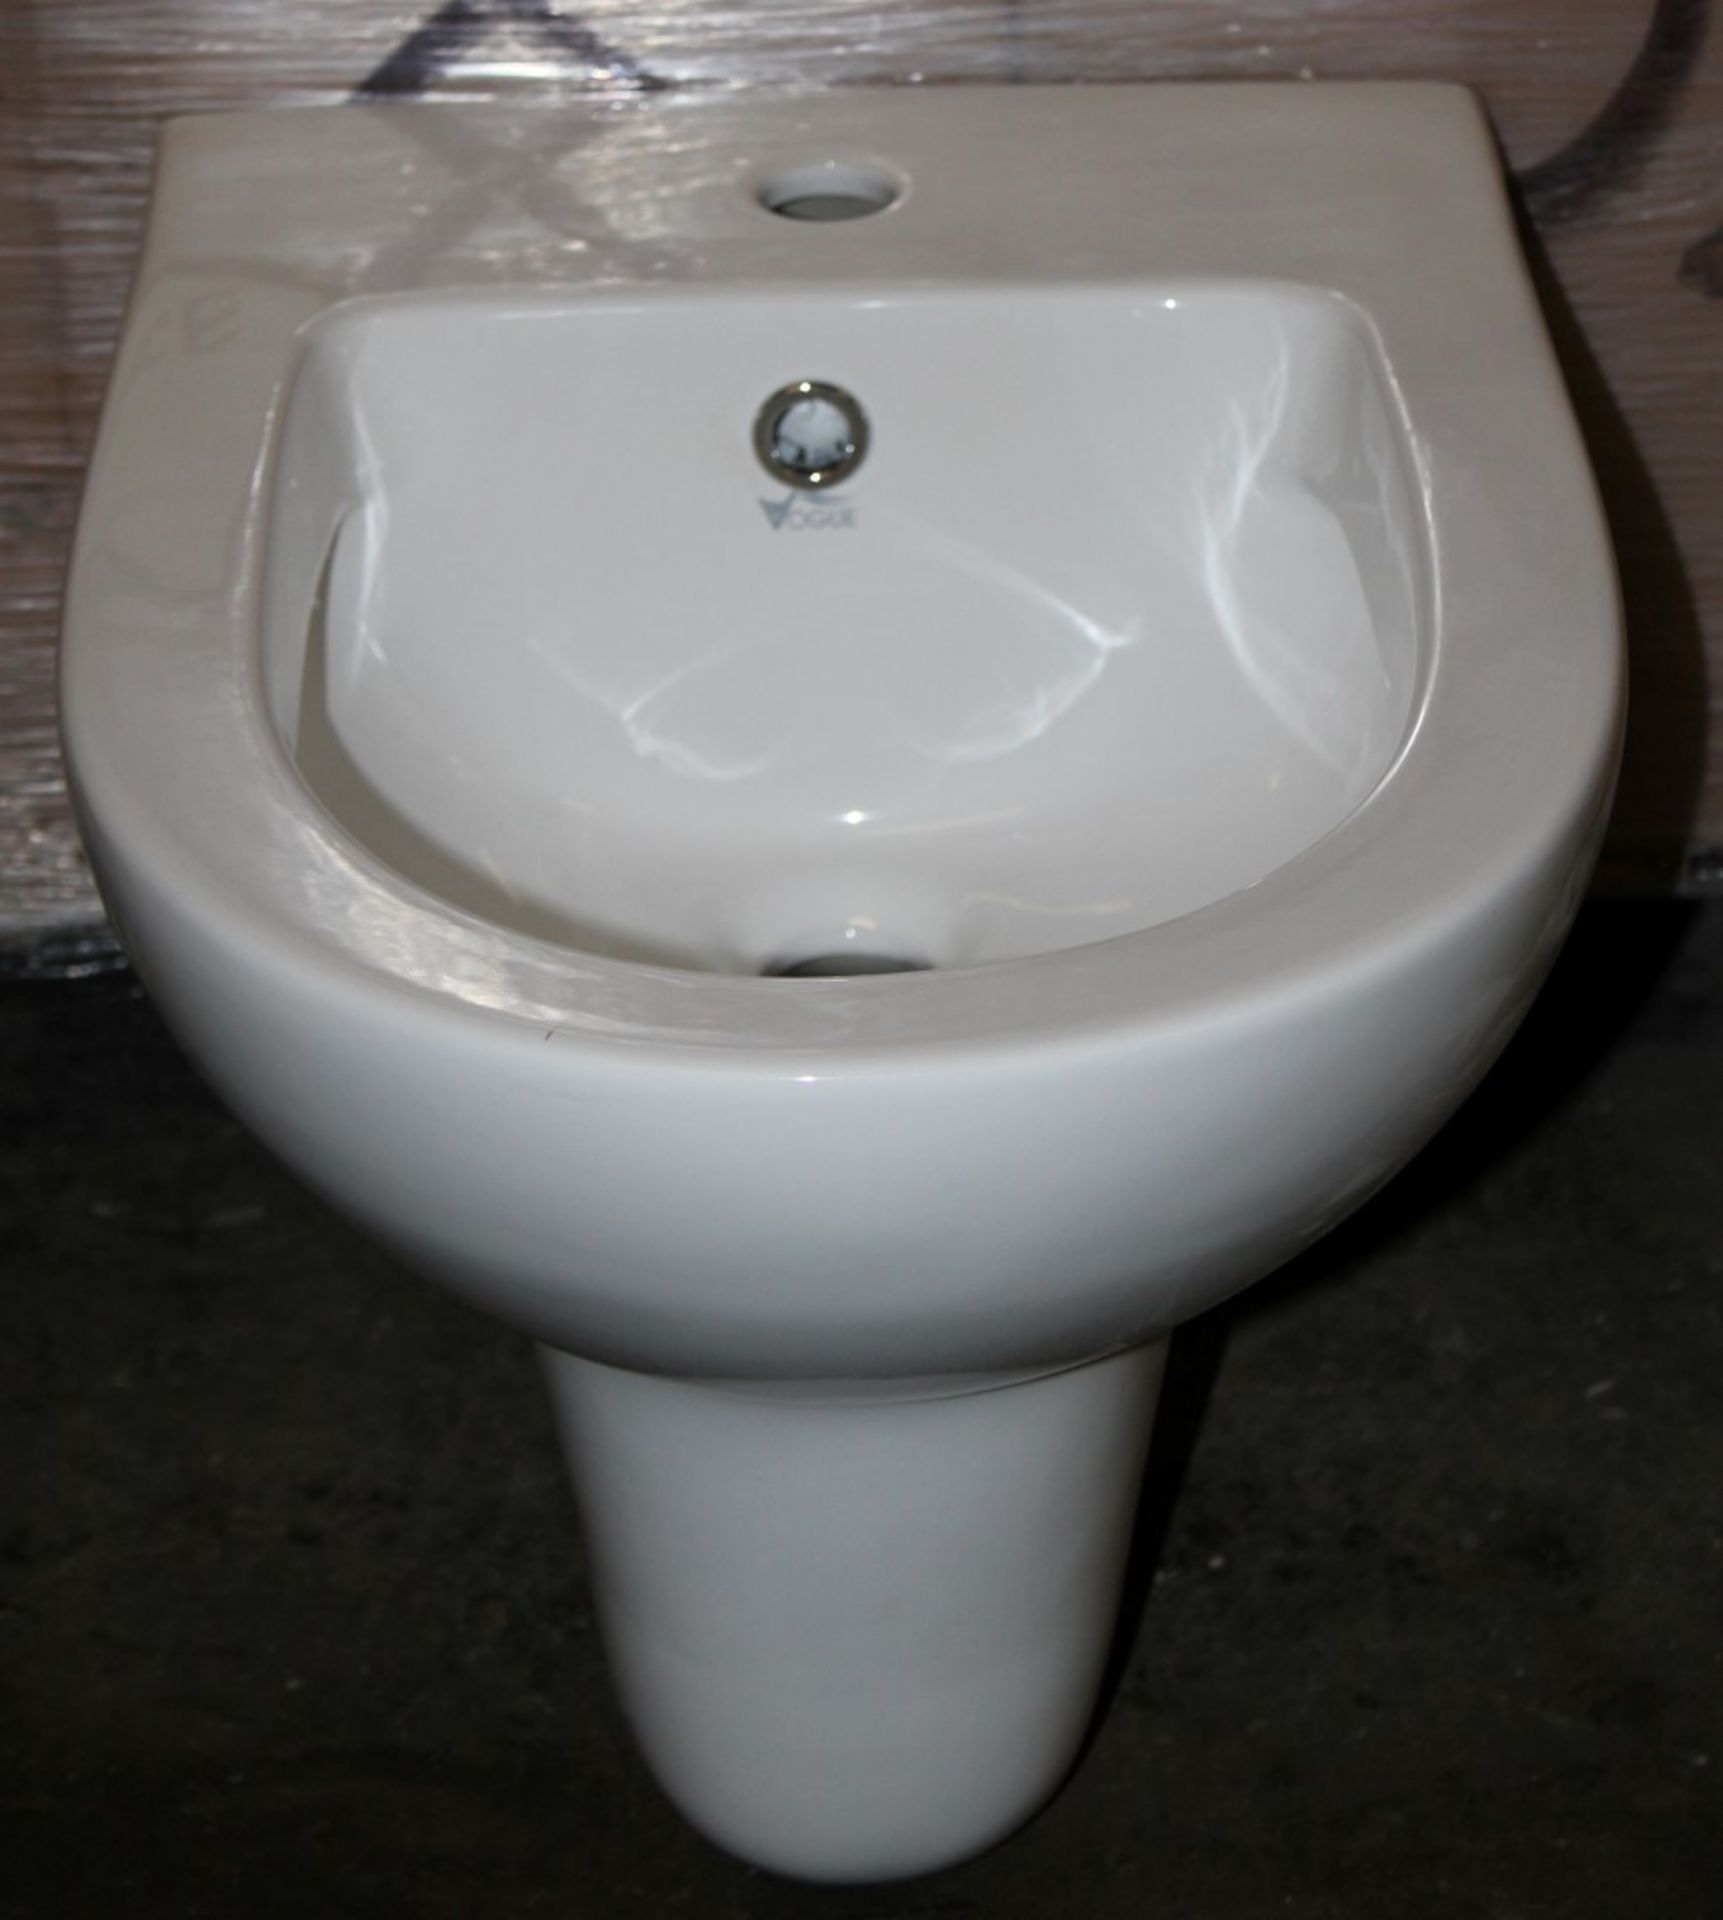 1 x Vogue Bathrooms KAMARA Single Tap Hole WALL HUNG BIDET - Brand New and Boxed - High Quality - Image 3 of 4